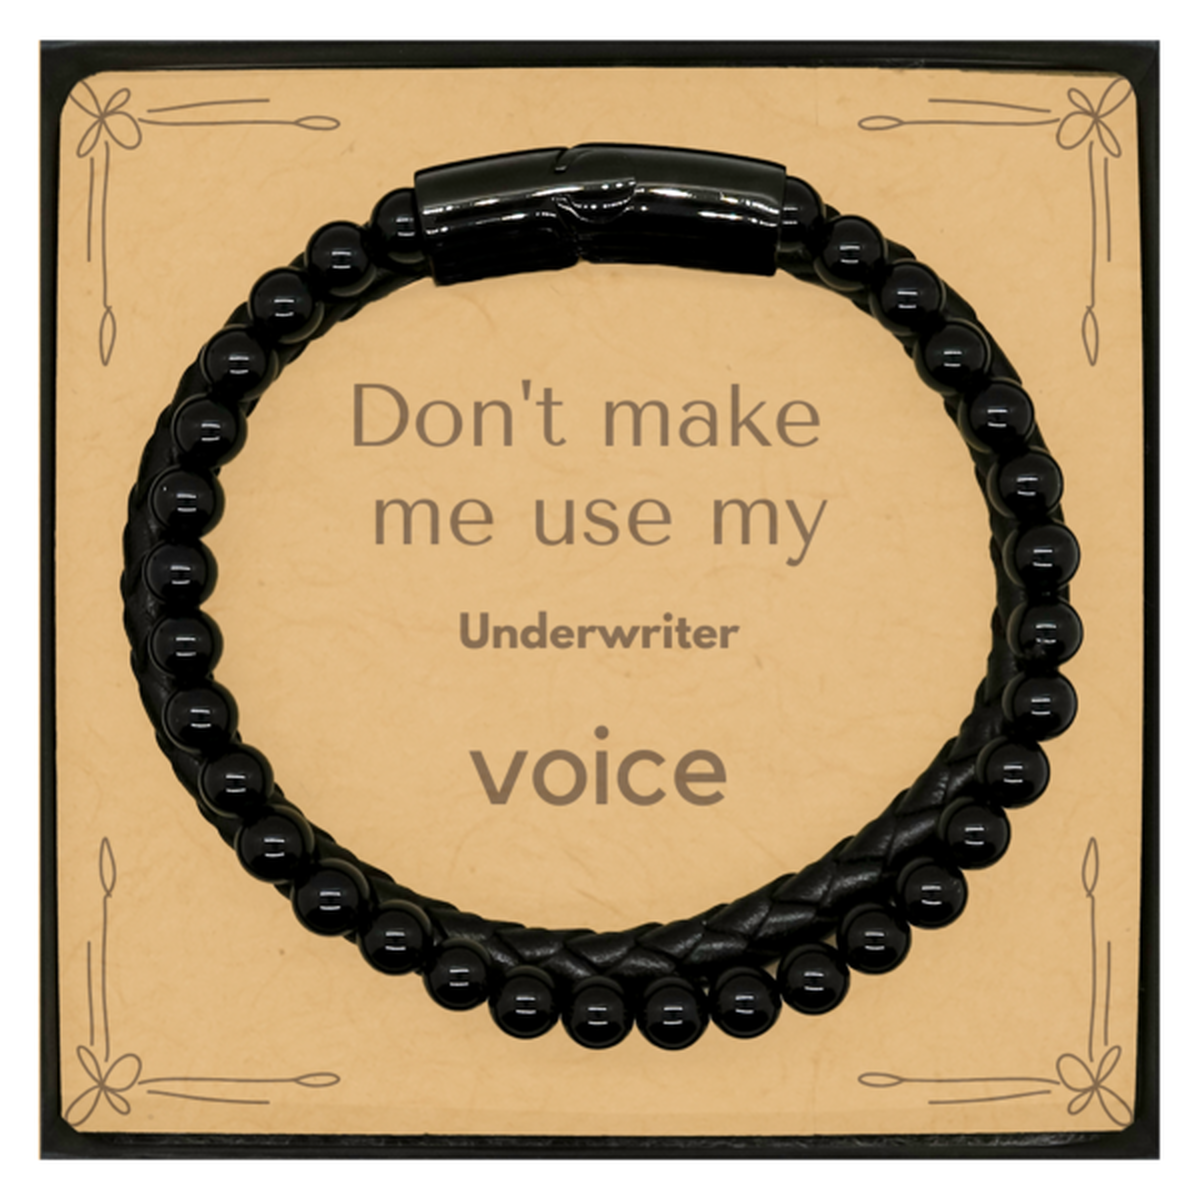 Don't make me use my Underwriter voice, Sarcasm Underwriter Card Gifts, Christmas Underwriter Stone Leather Bracelets Birthday Unique Gifts For Underwriter Coworkers, Men, Women, Colleague, Friends